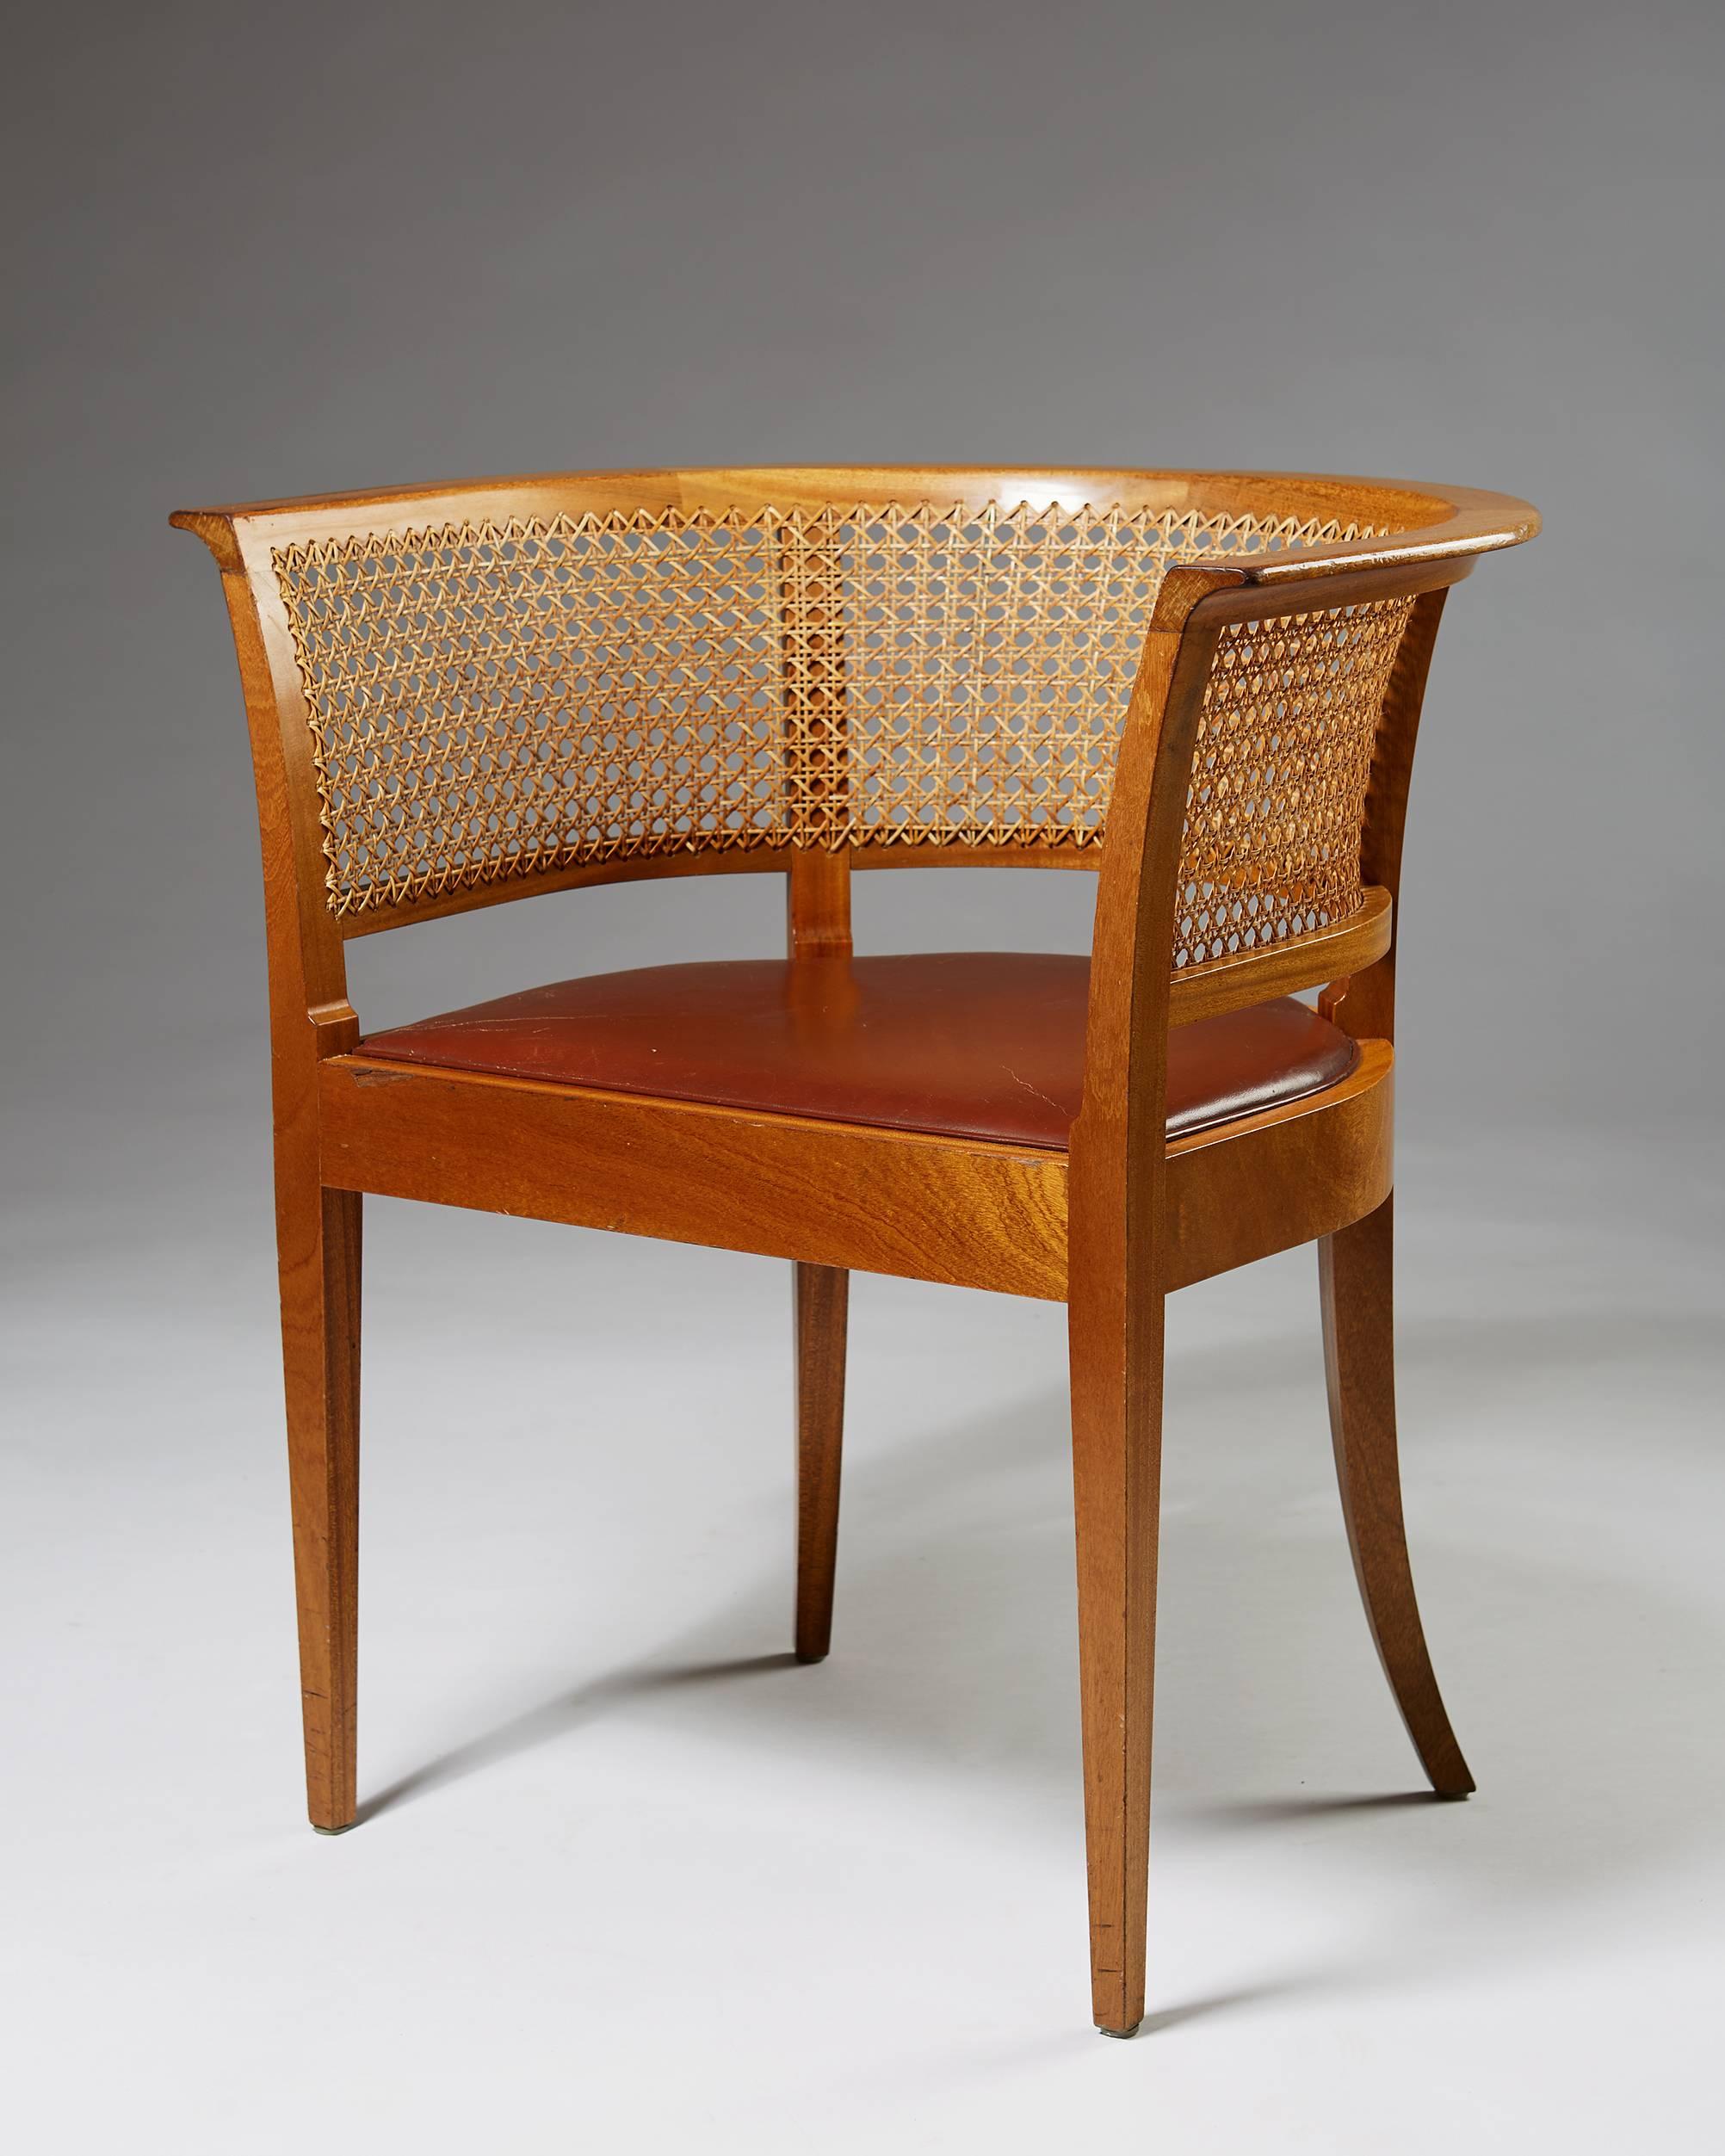 Mahogany, cane and leather.

This example made in the 1950s.

Measure: H 73 cm/ 2' 5 1/4''
W 70 cm/2' 4''
D 54,5 cm/ 21 1/2''
SH 45 cm/ 17 3/4''


In the history of Danish modernism, the Faaborg chair holds a special place. Designed by